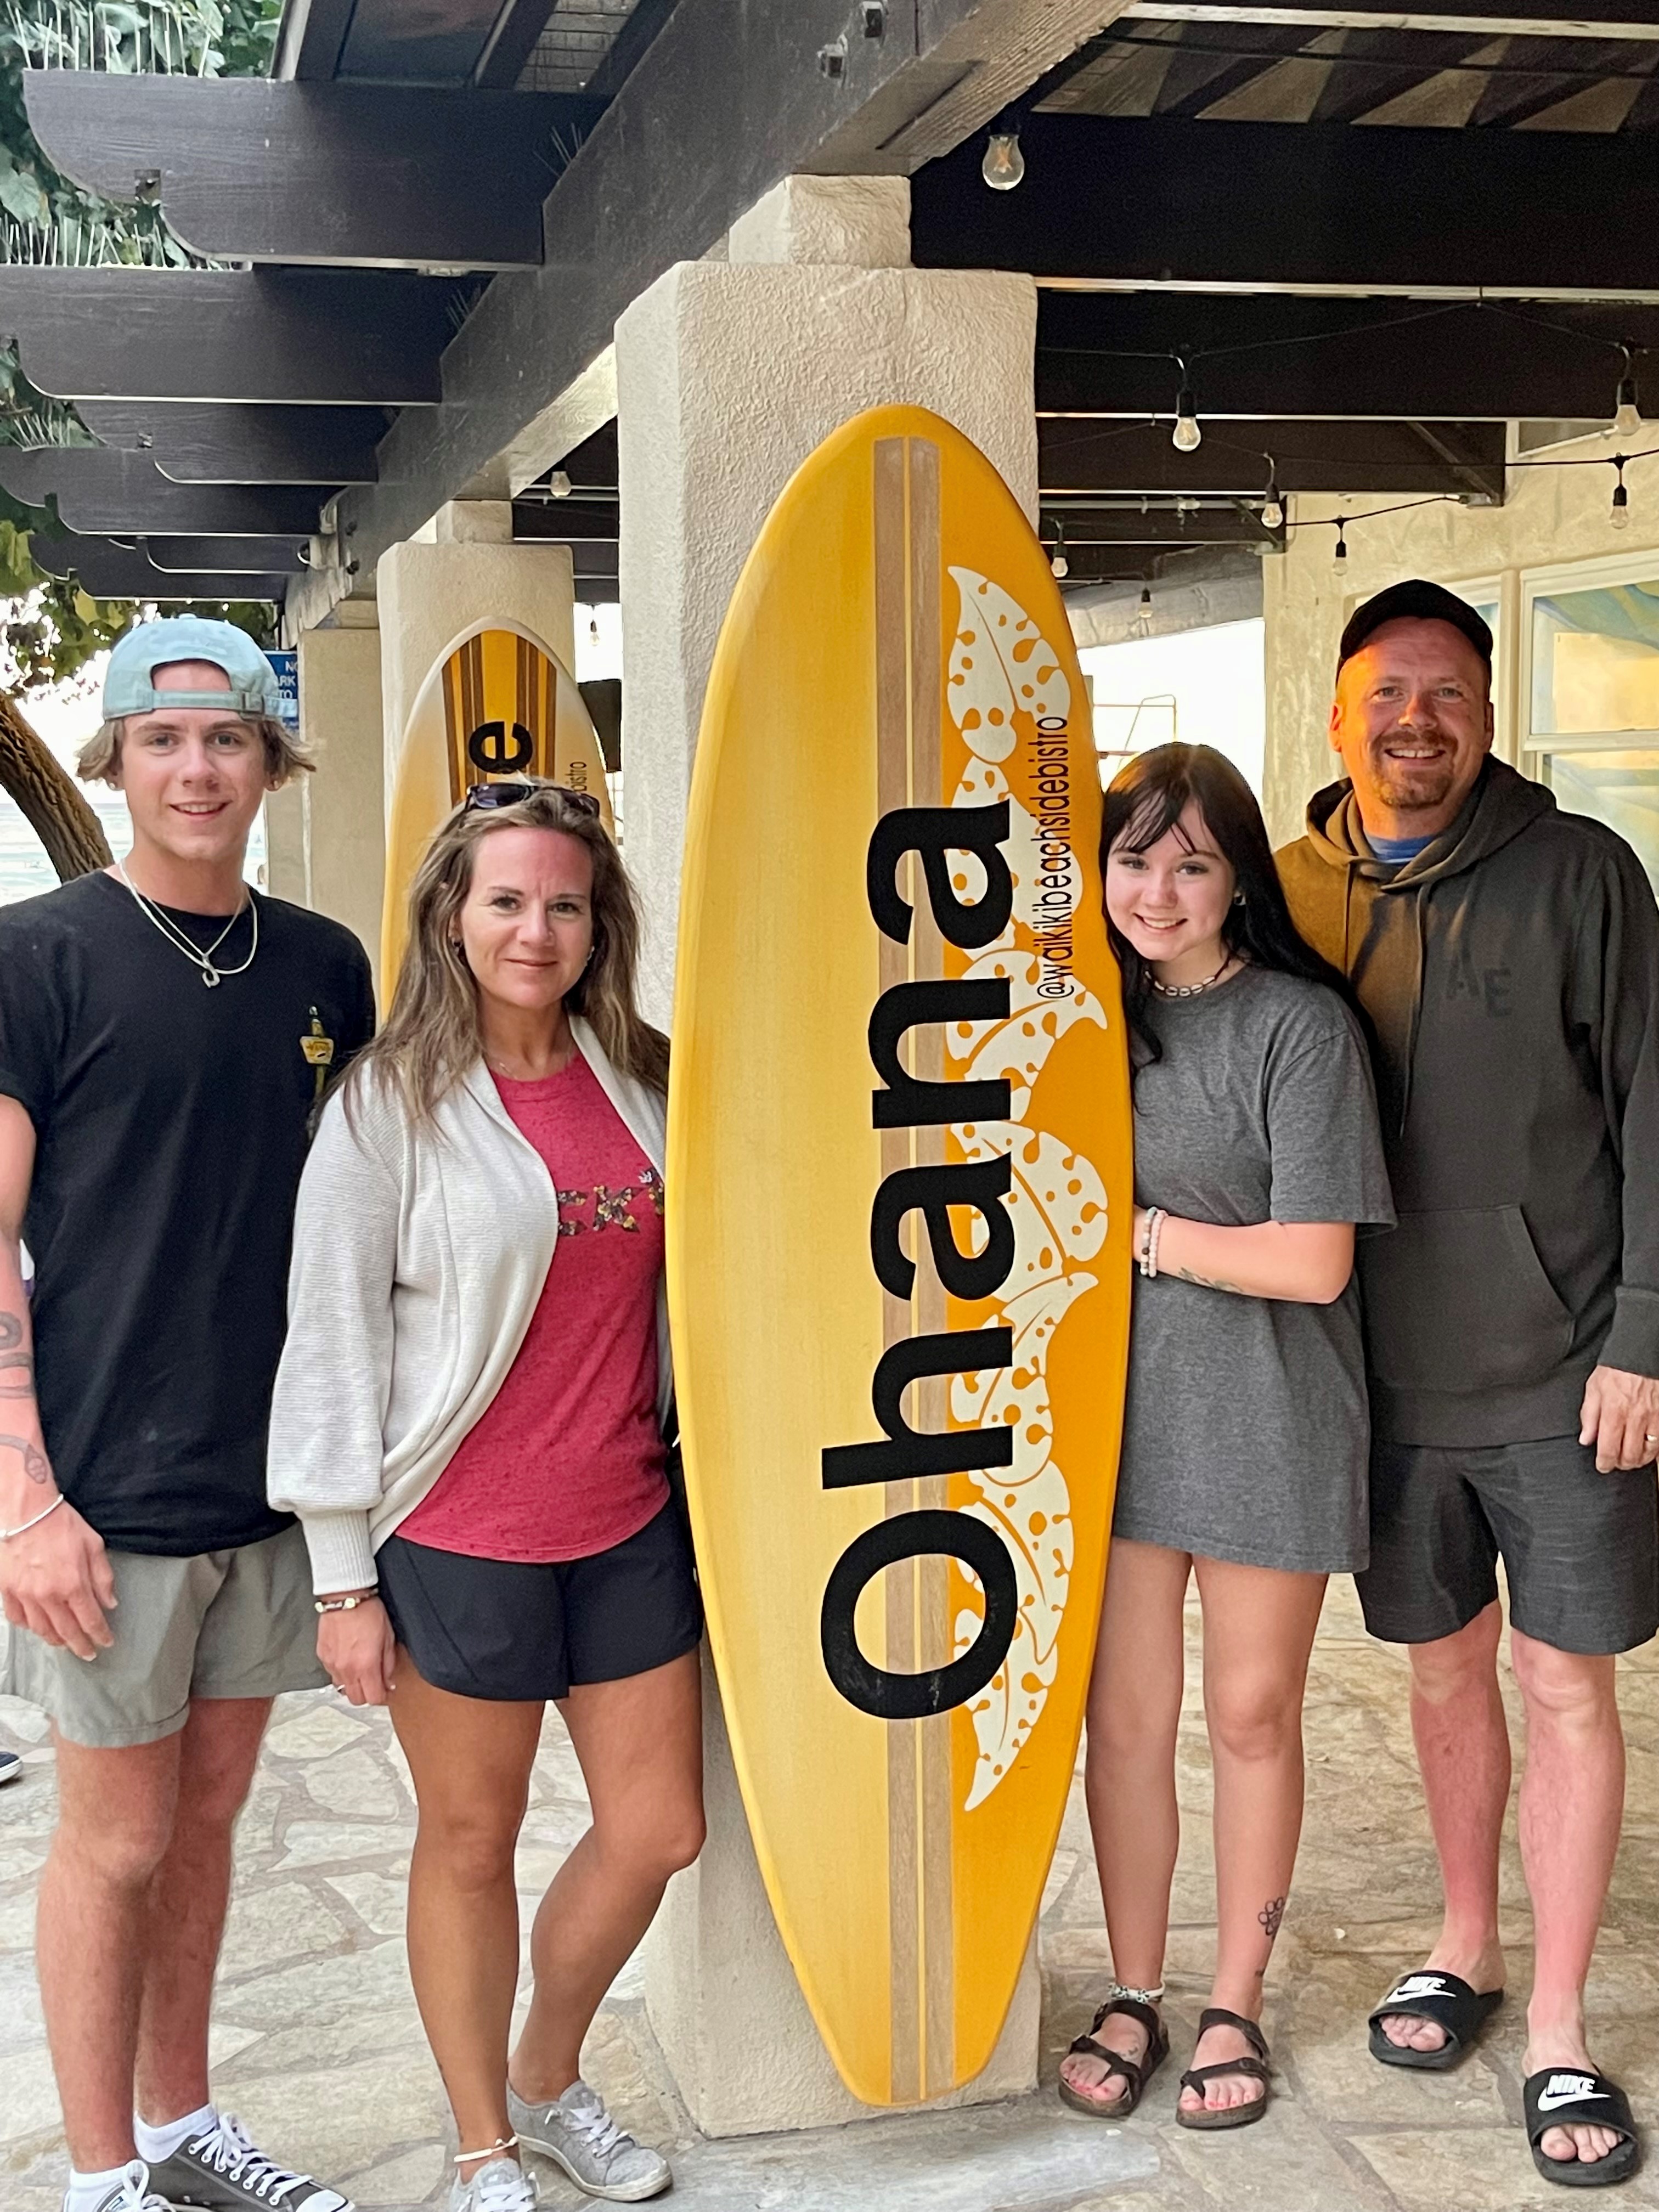 Two adults and two younger people pose for picture while standing underneath an awning and holding a large surfboard that reads Ohana.